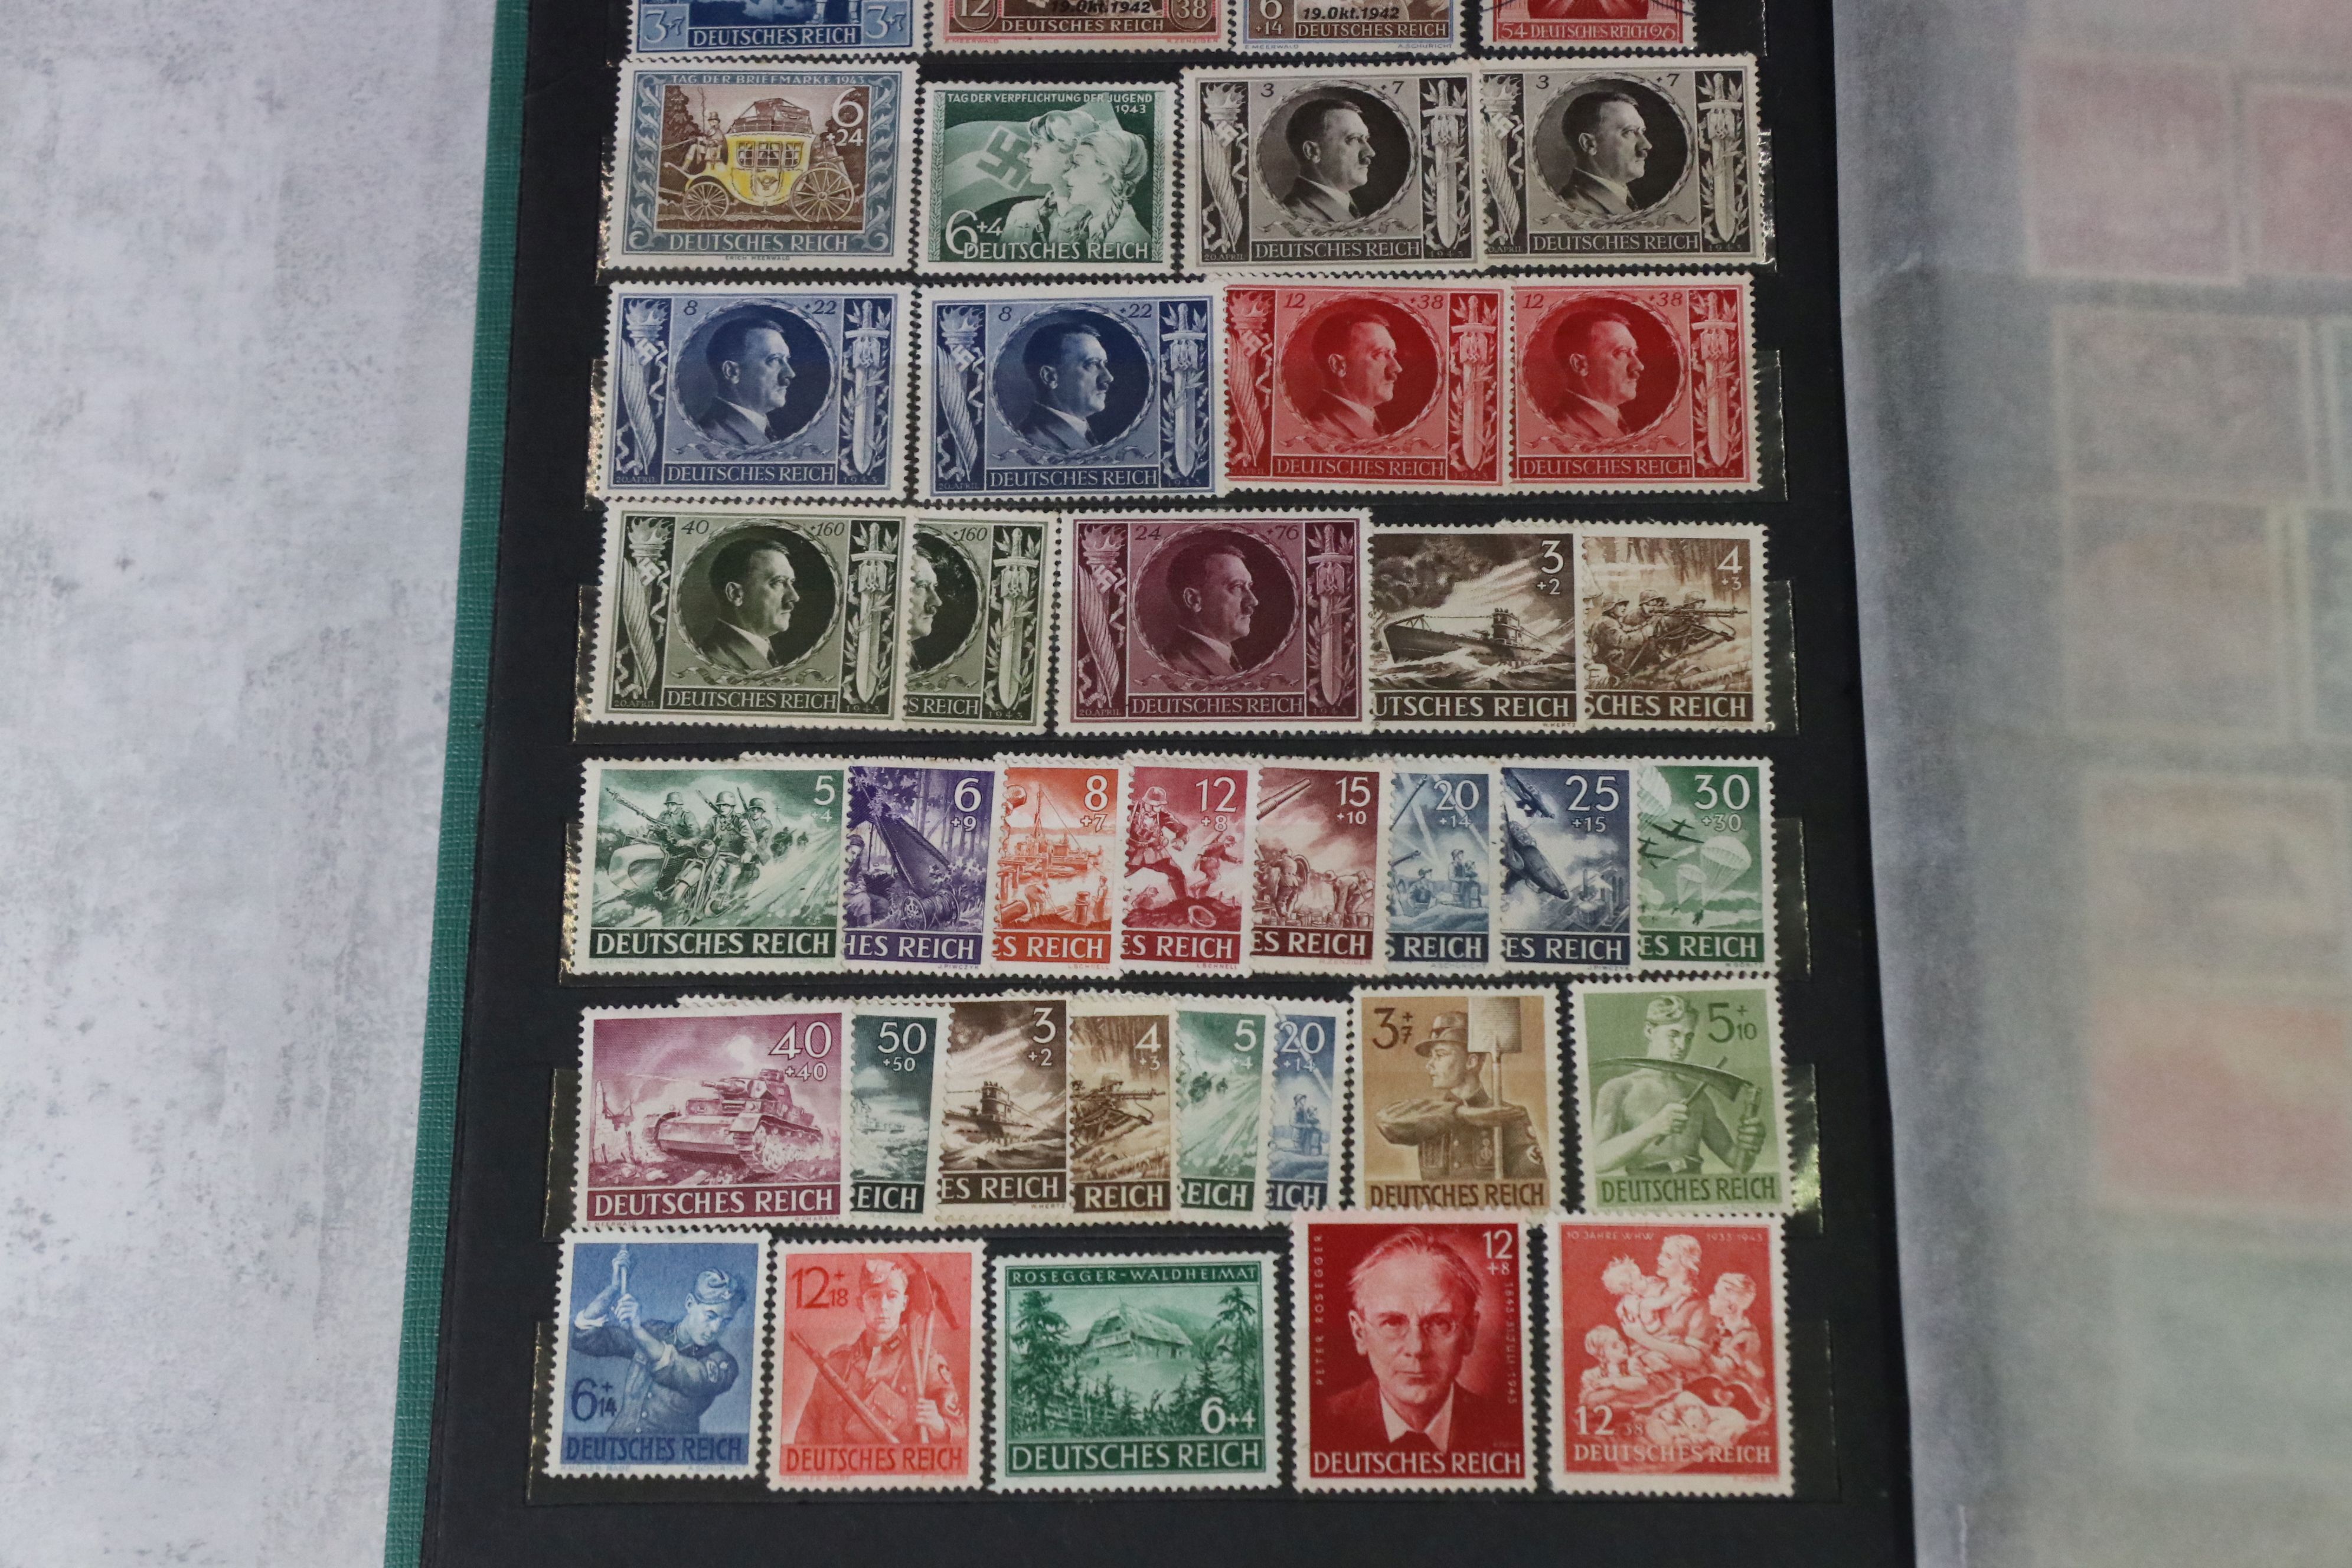 A Large Concise Collection Of World War One And World War Two German Stamps To Include Many Mint - Image 6 of 7